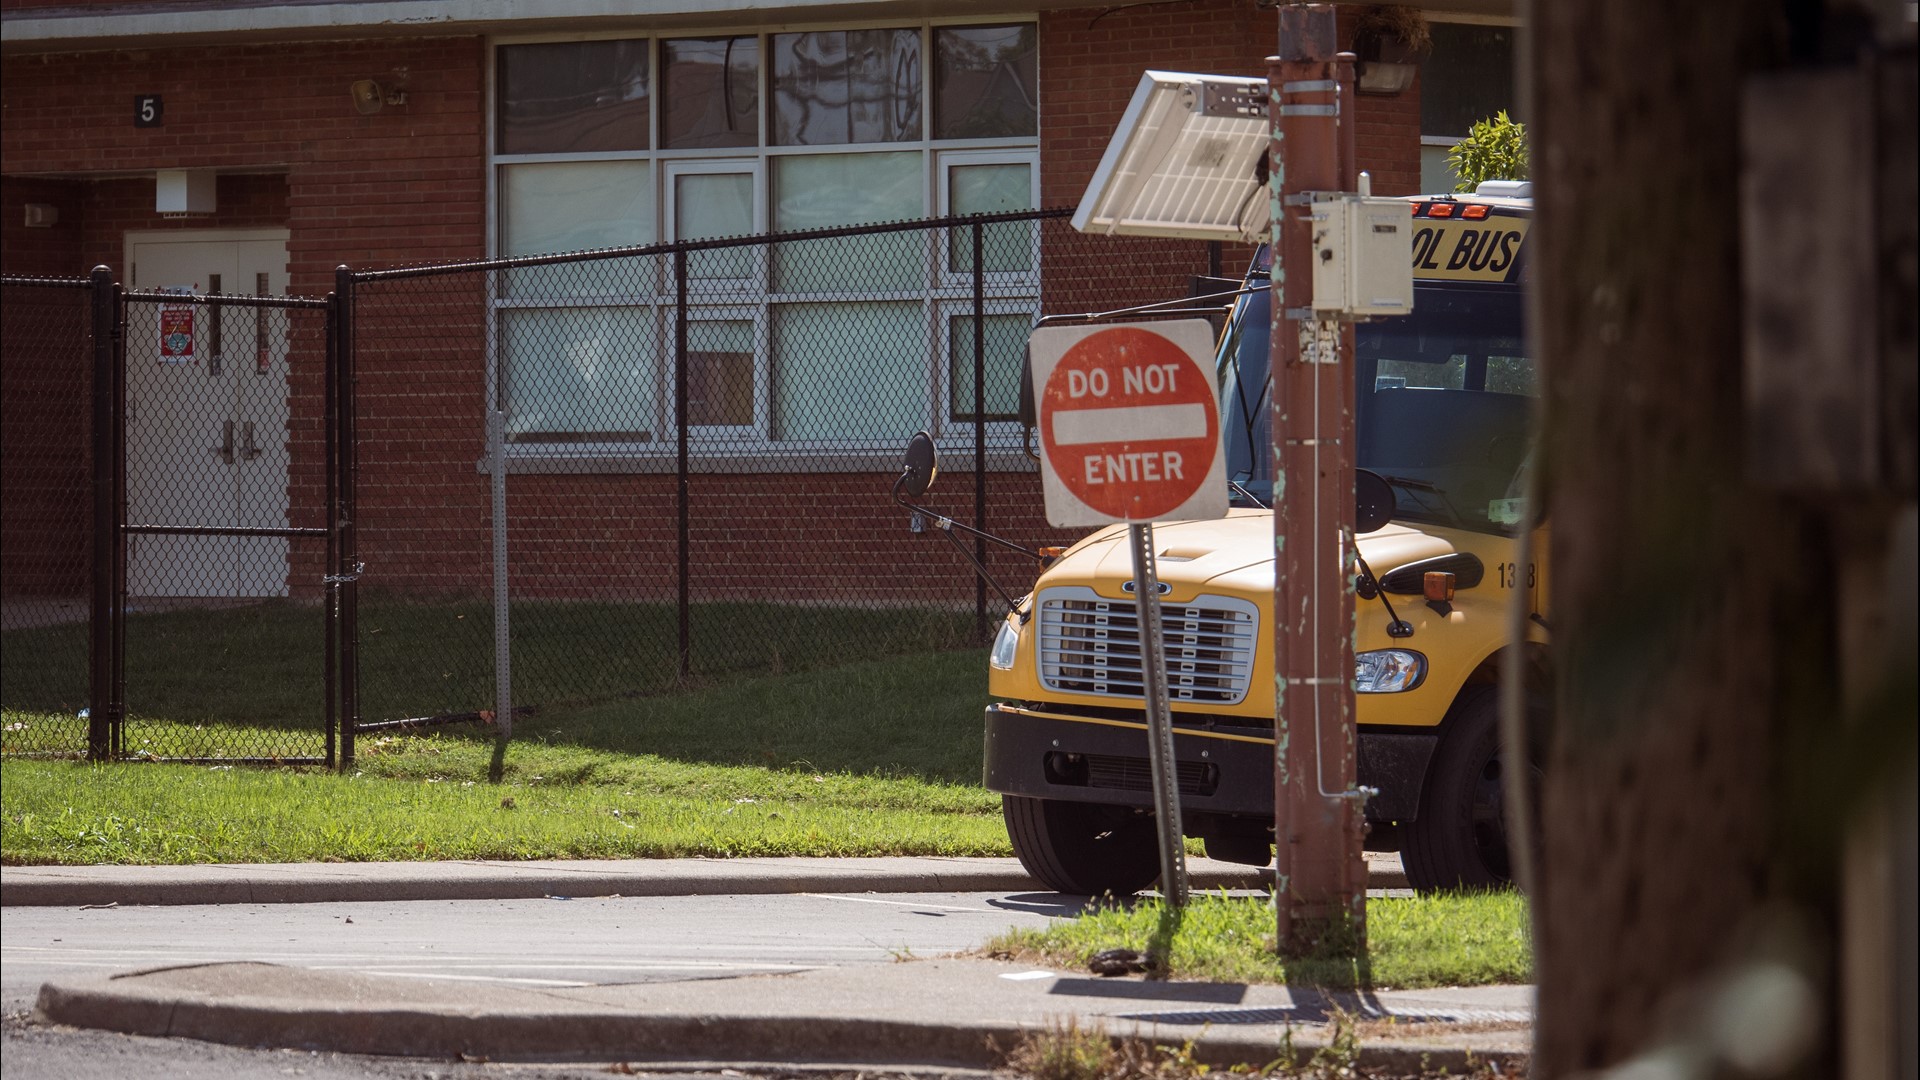 John Stovall, president of Teamsters Local 783, said the plan would help ease the burden on bus drivers. But, he wants to see more to address school bus misbehavior.